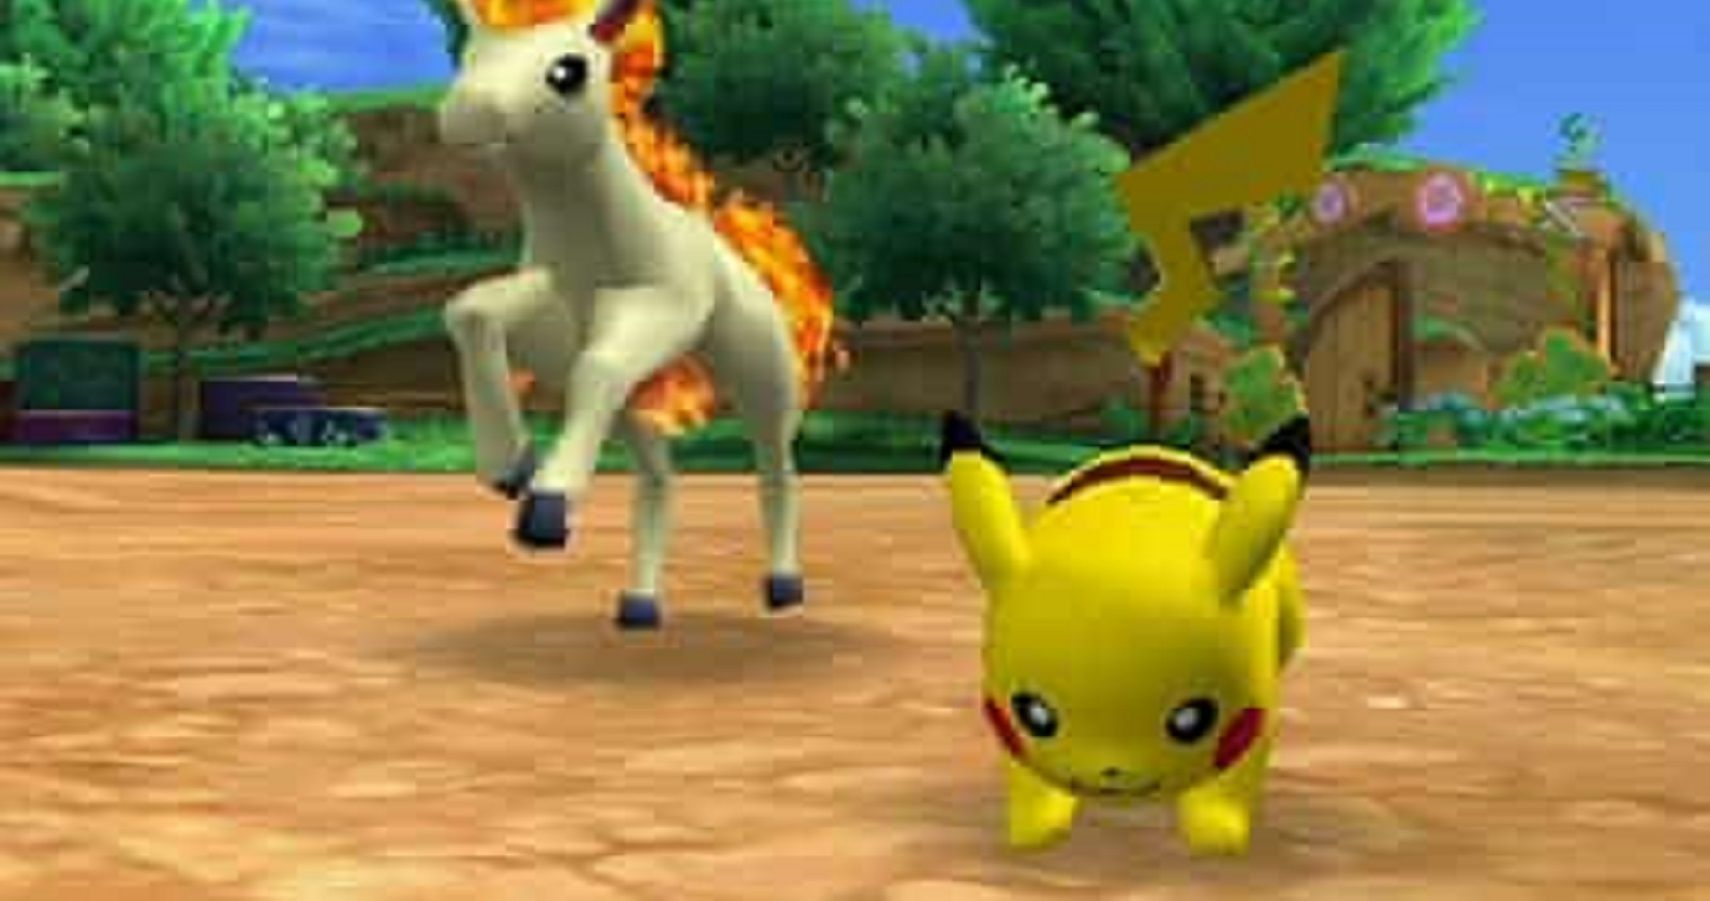 After New Pokemon Snap We Need New PokePark